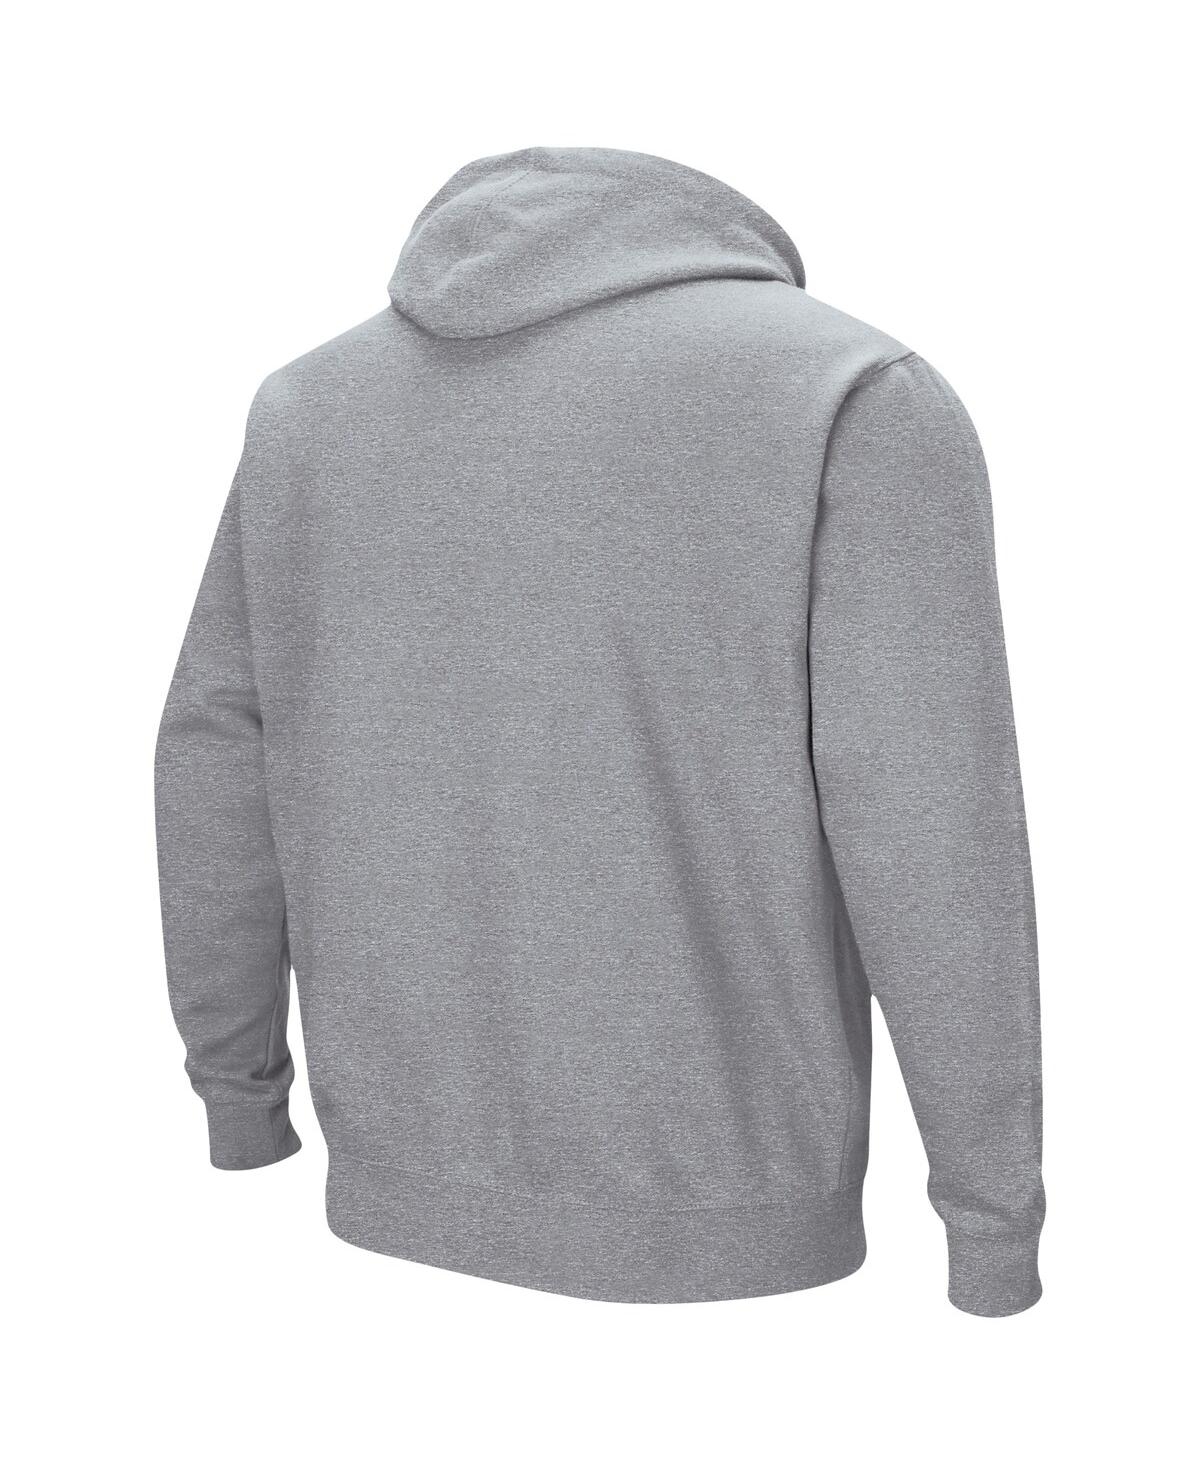 Shop Colosseum Men's  Heathered Gray Pitt Panthers Arch & Logo 3.0 Pullover Hoodie